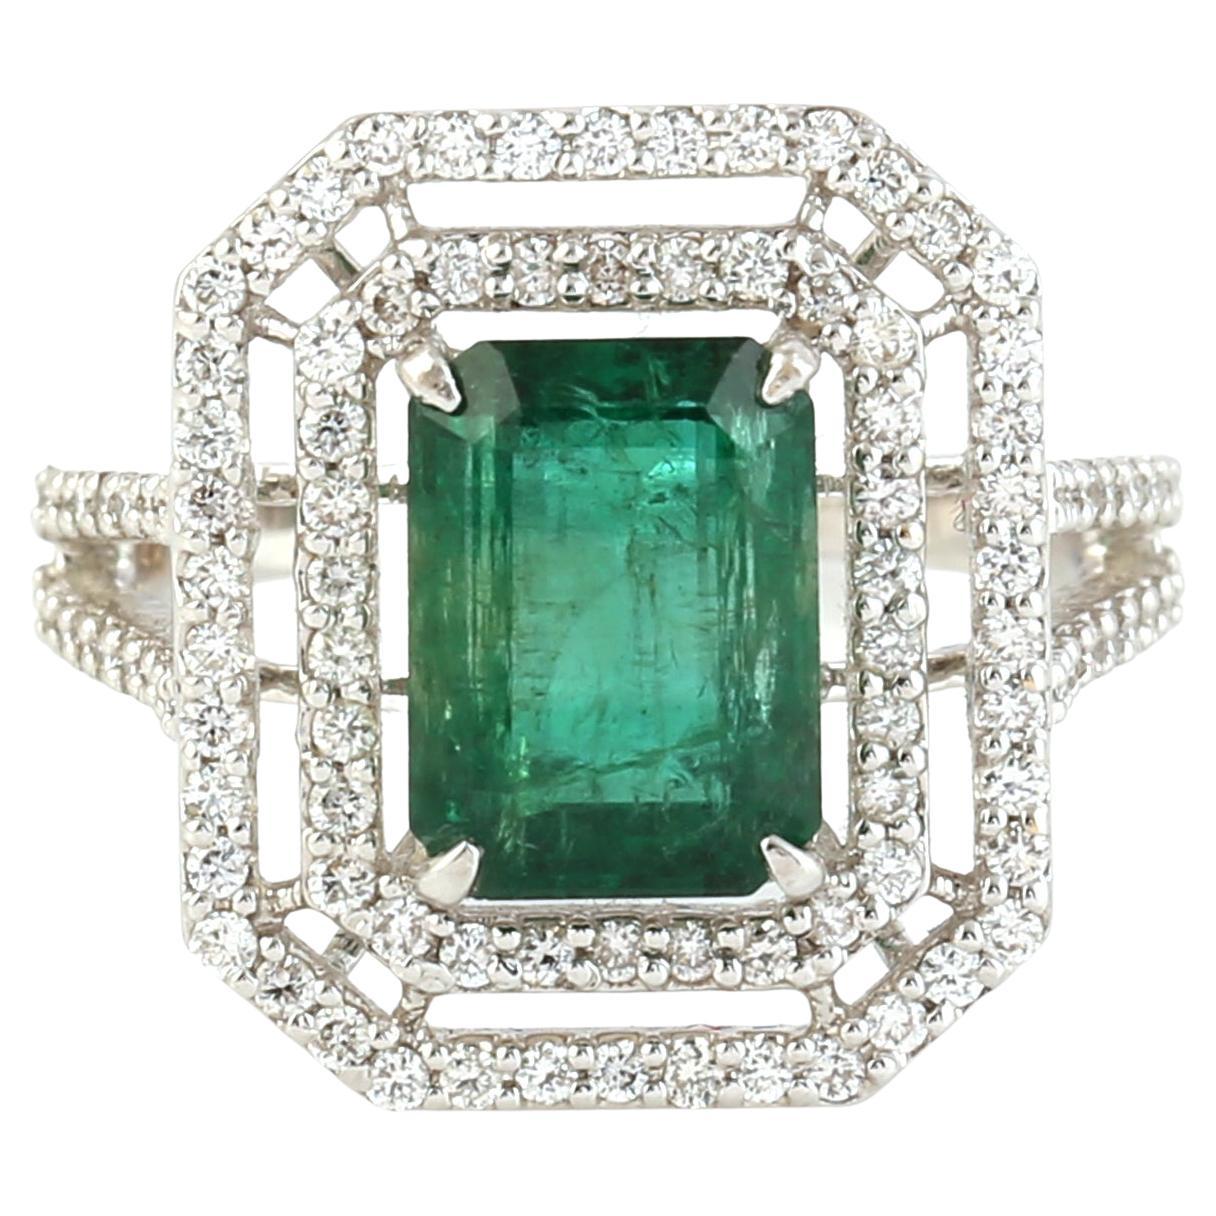 Octogen Cut Zambian Emerald Ring with Diamonds Made in 14k White Gold For Sale